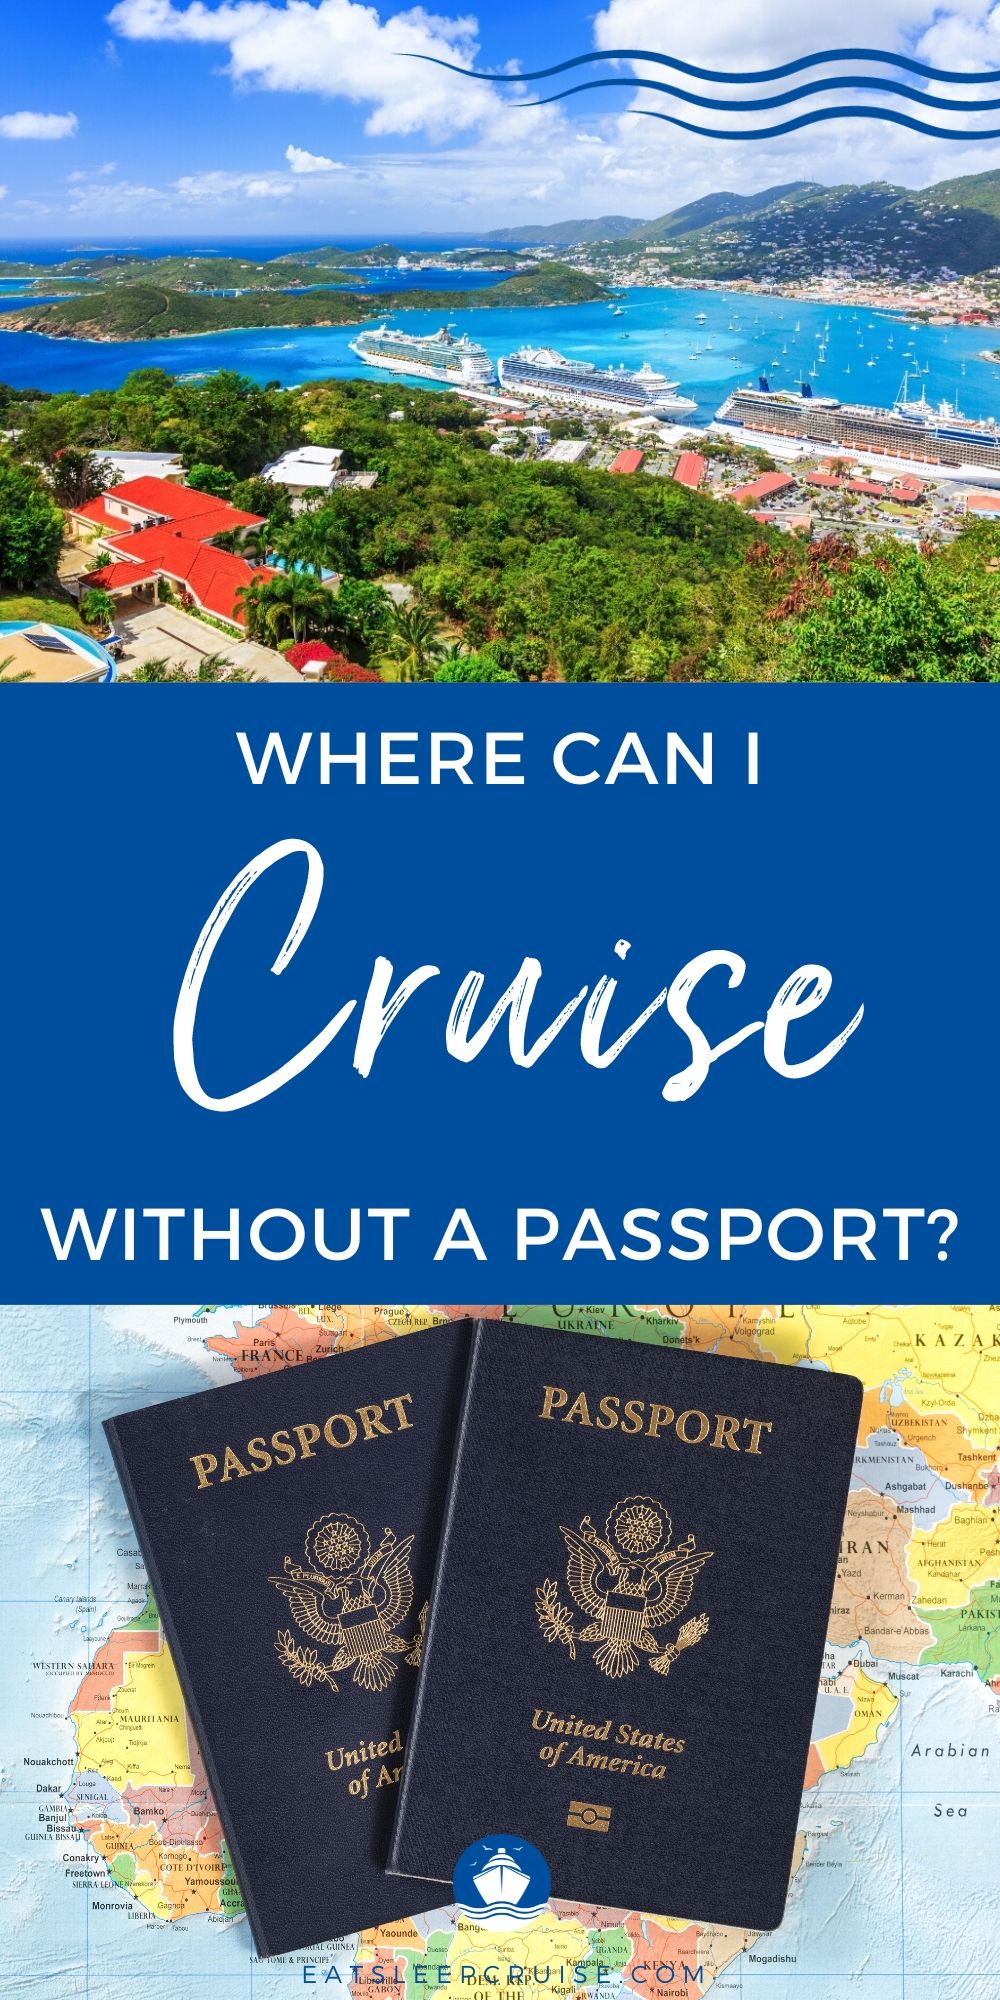 Cruise Without A Passport 1 .optimal 